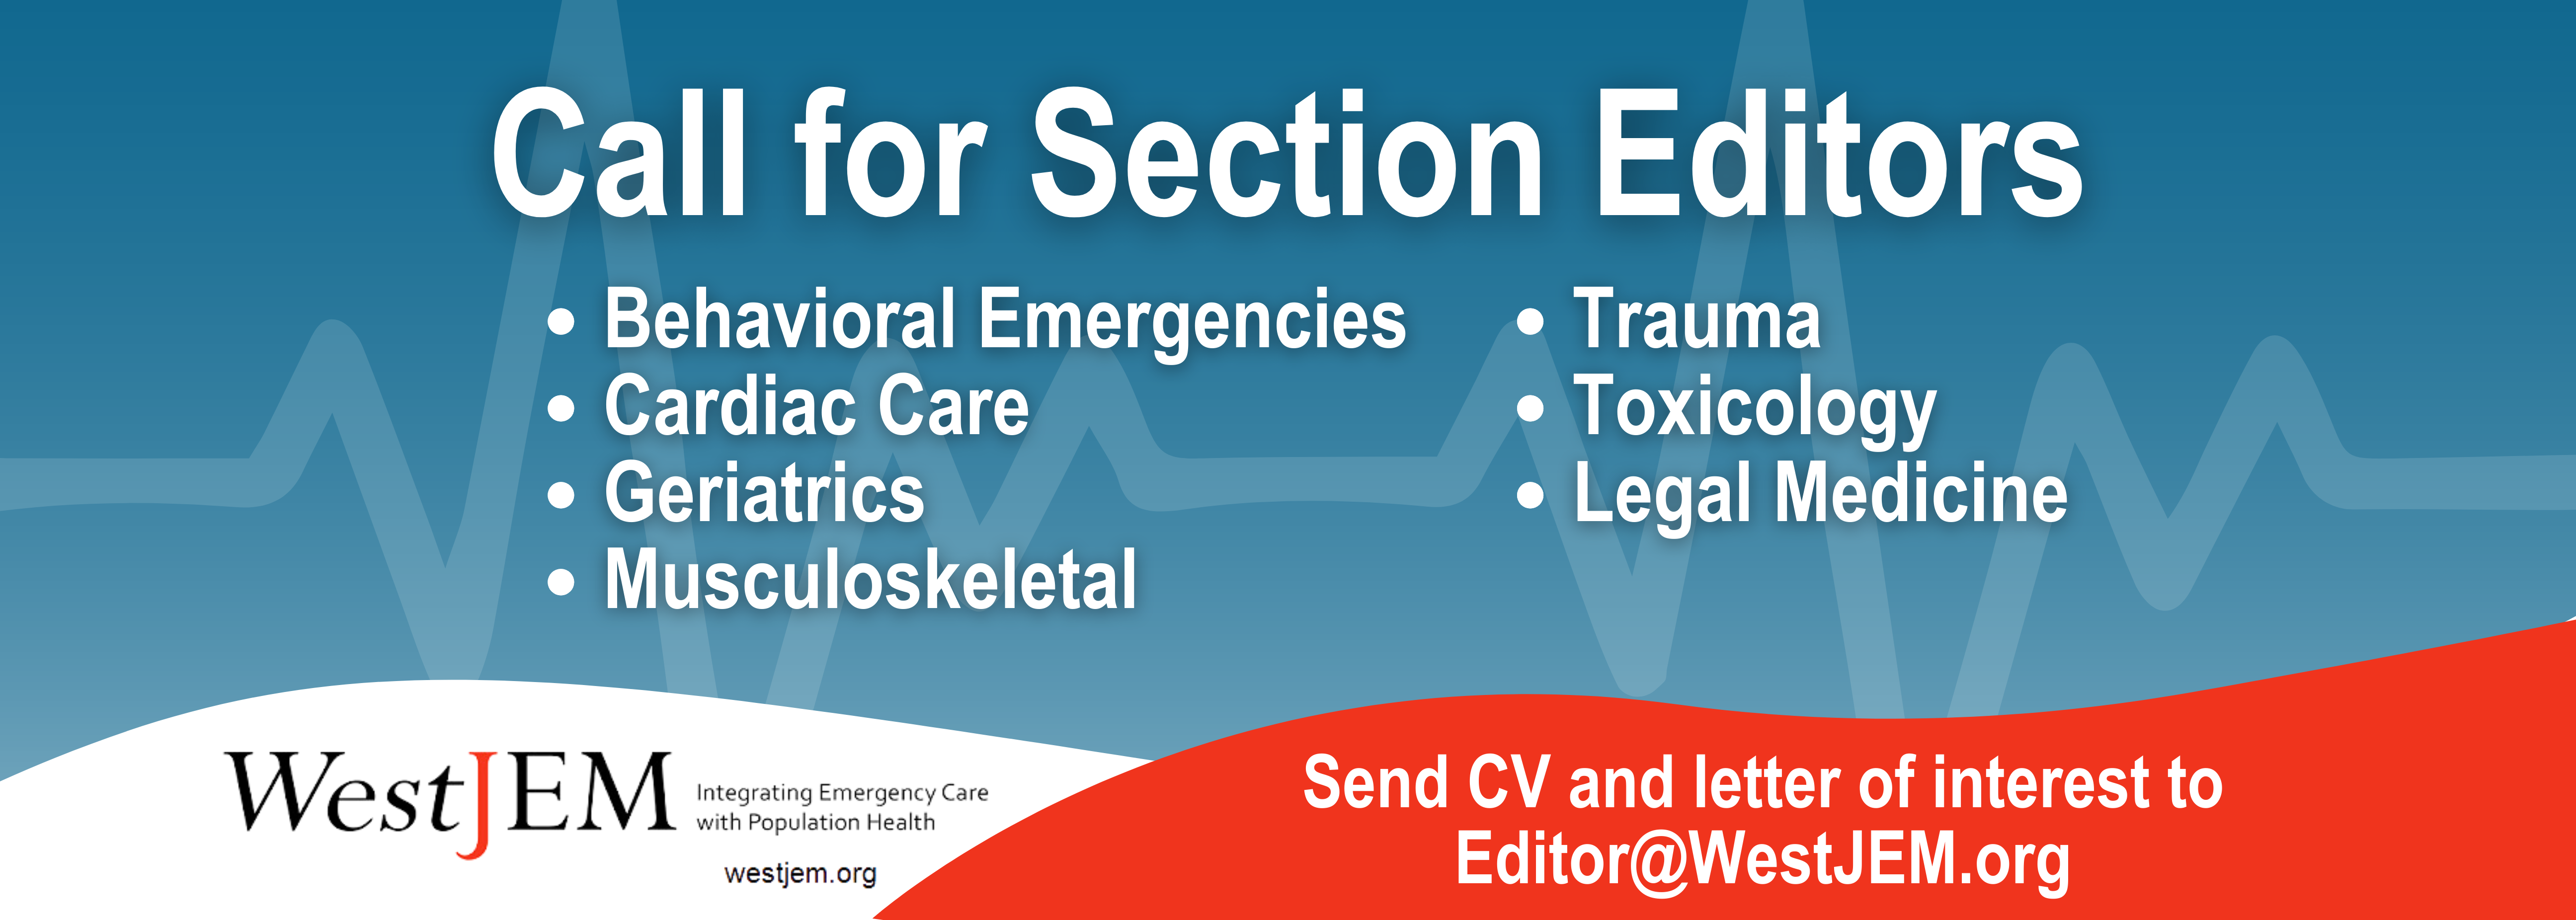 Call-for-Section-Editors-New-1